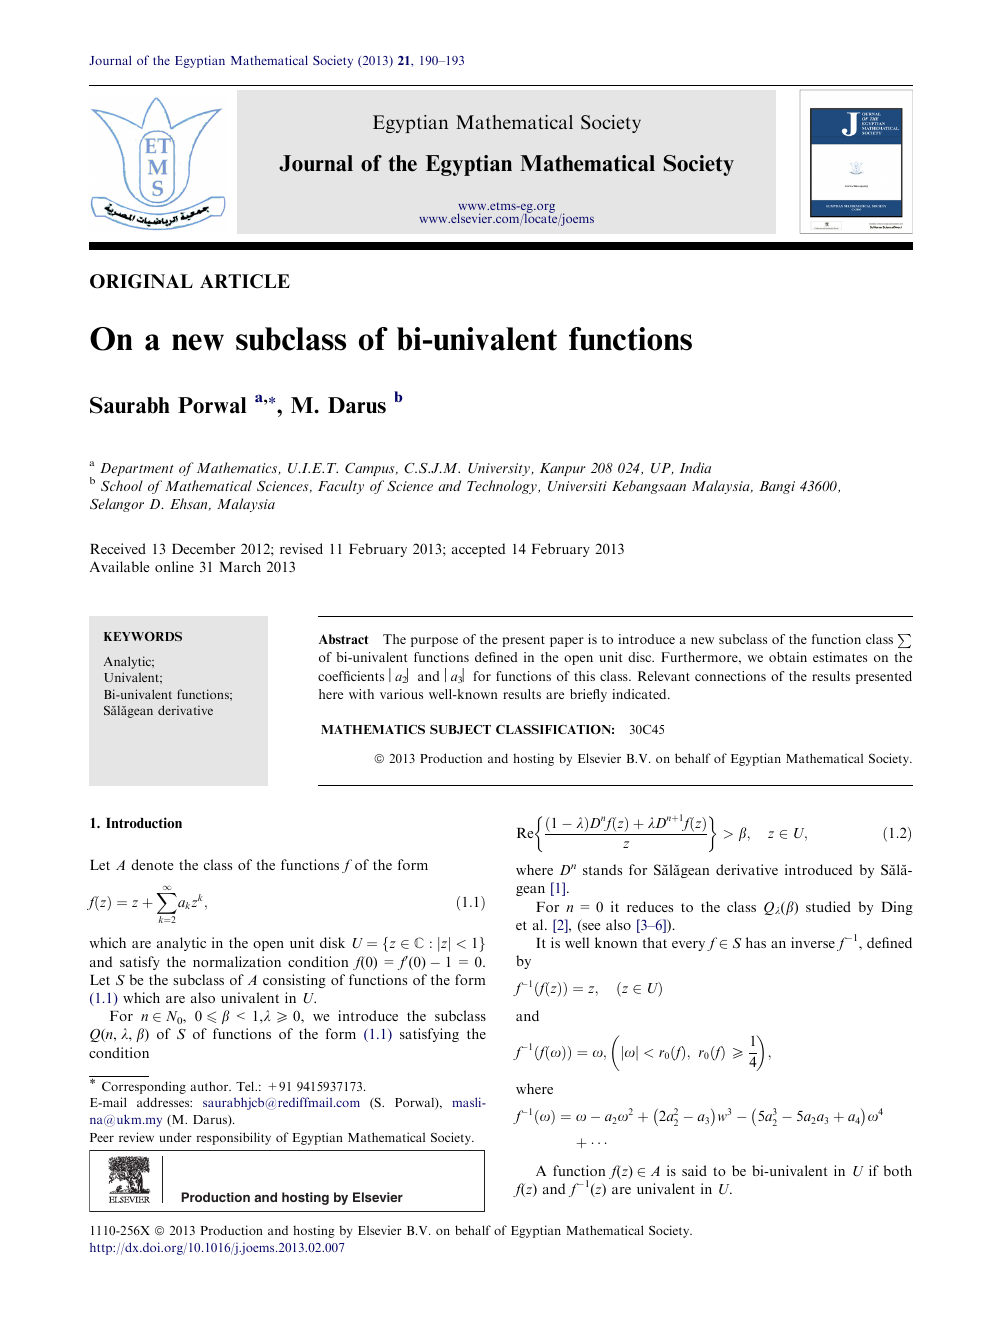 On A New Subclass Of Bi Univalent Functions Topic Of Research Paper In Mathematics Download Scholarly Article Pdf And Read For Free On Cyberleninka Open Science Hub